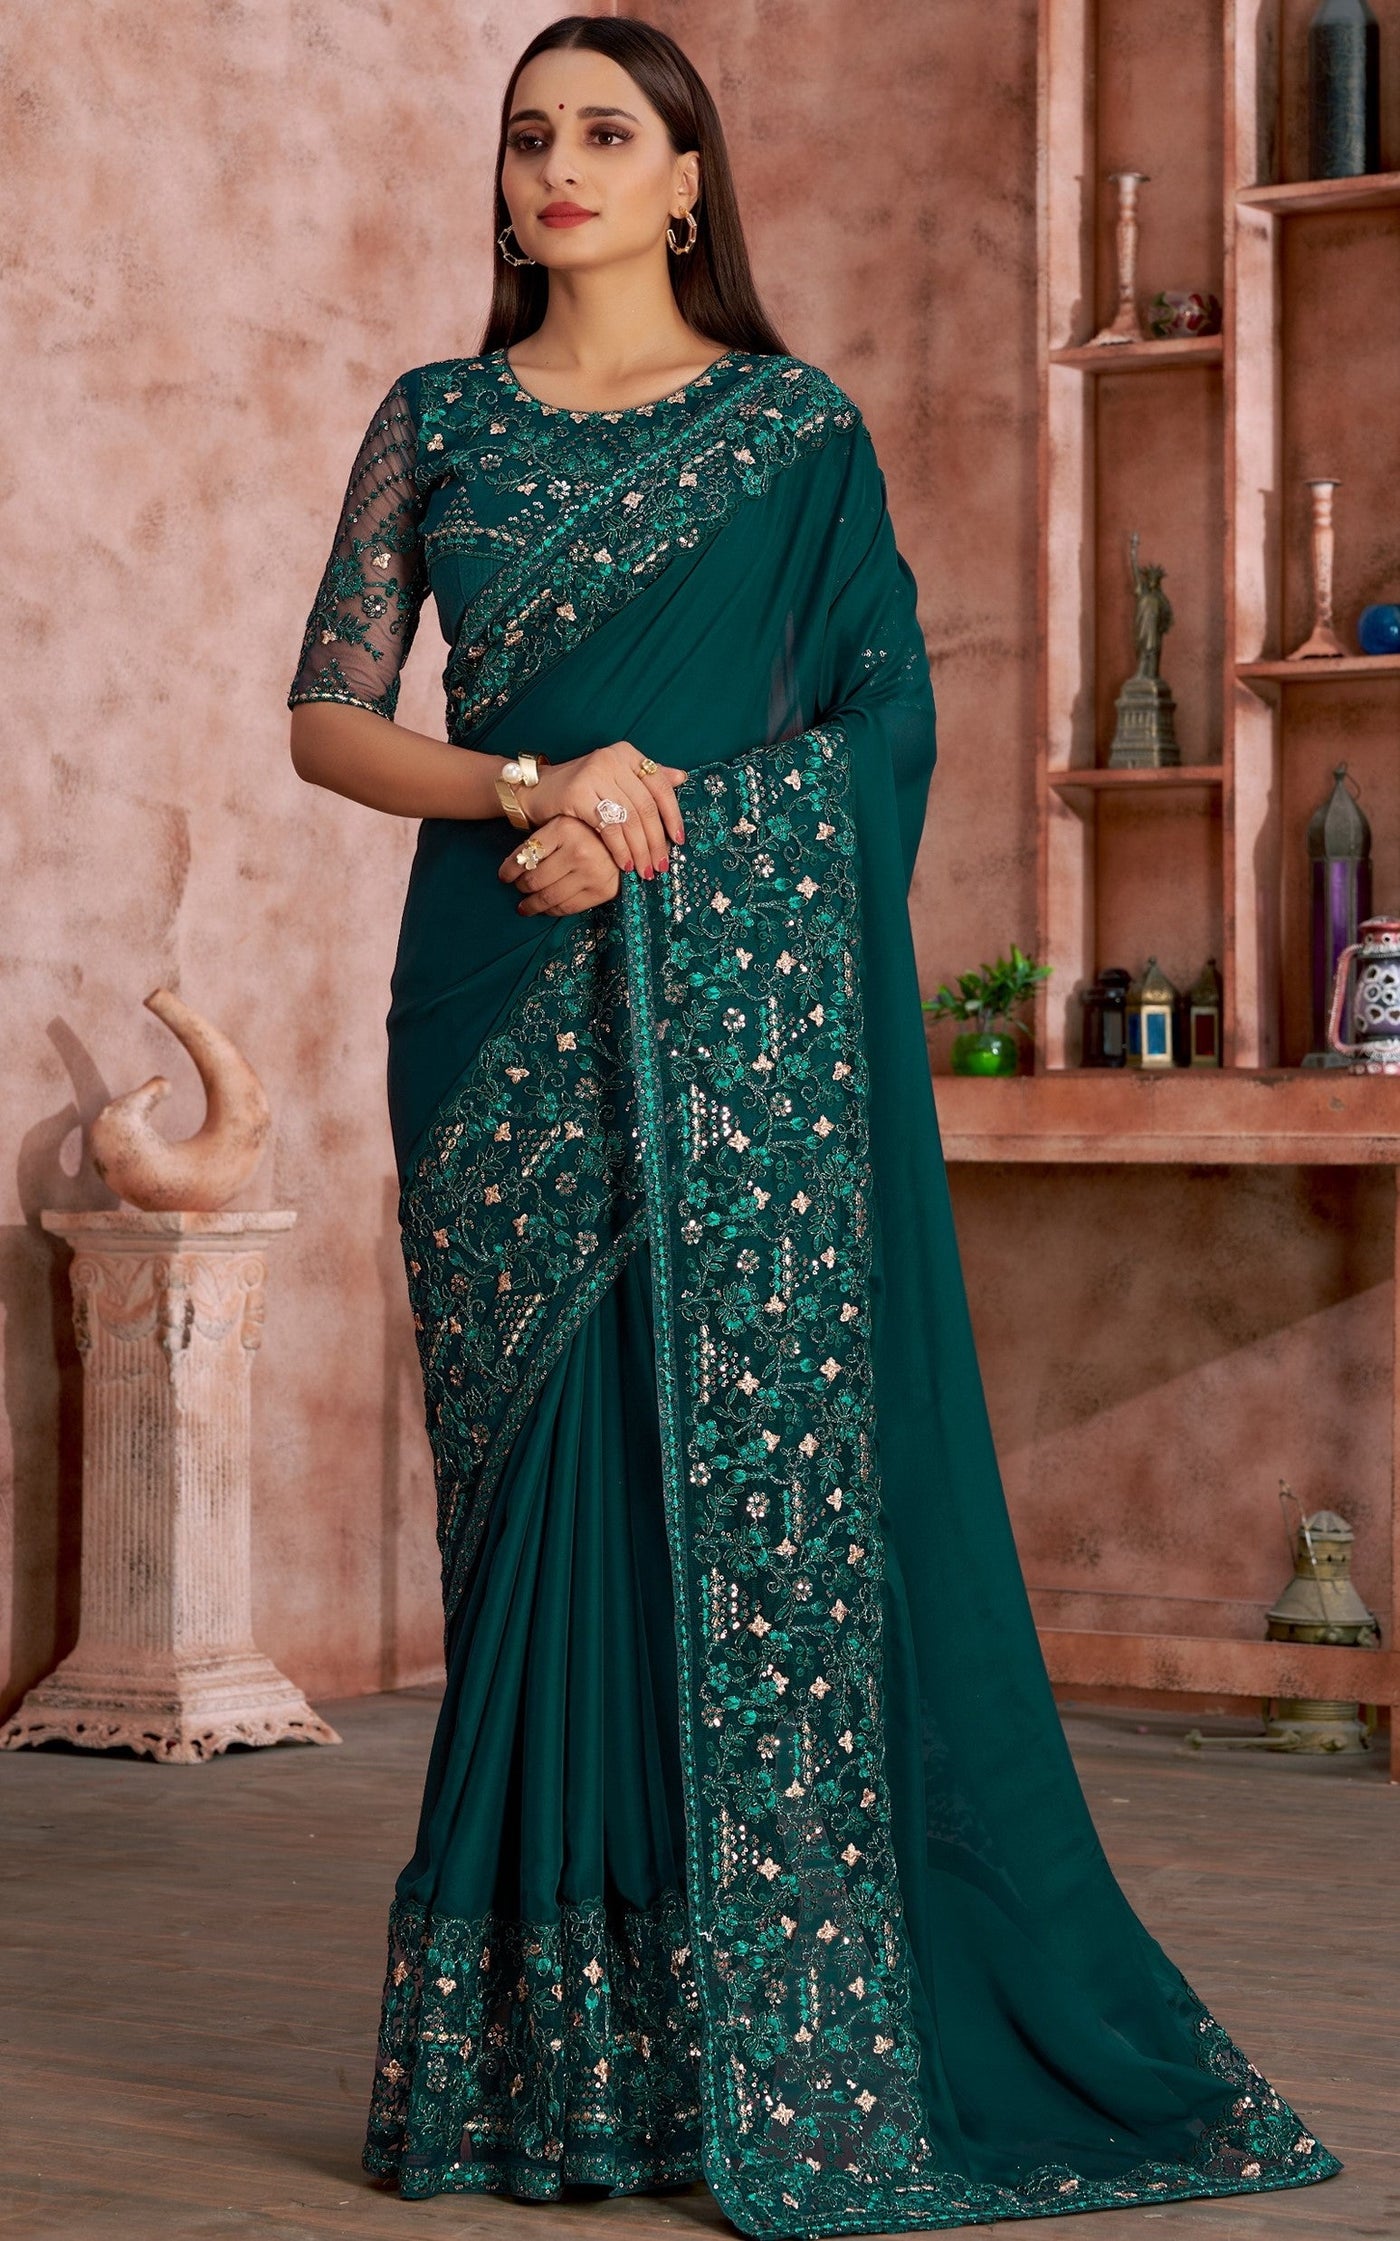 Peacock Blue Satin Embroidered Saree With Blouse